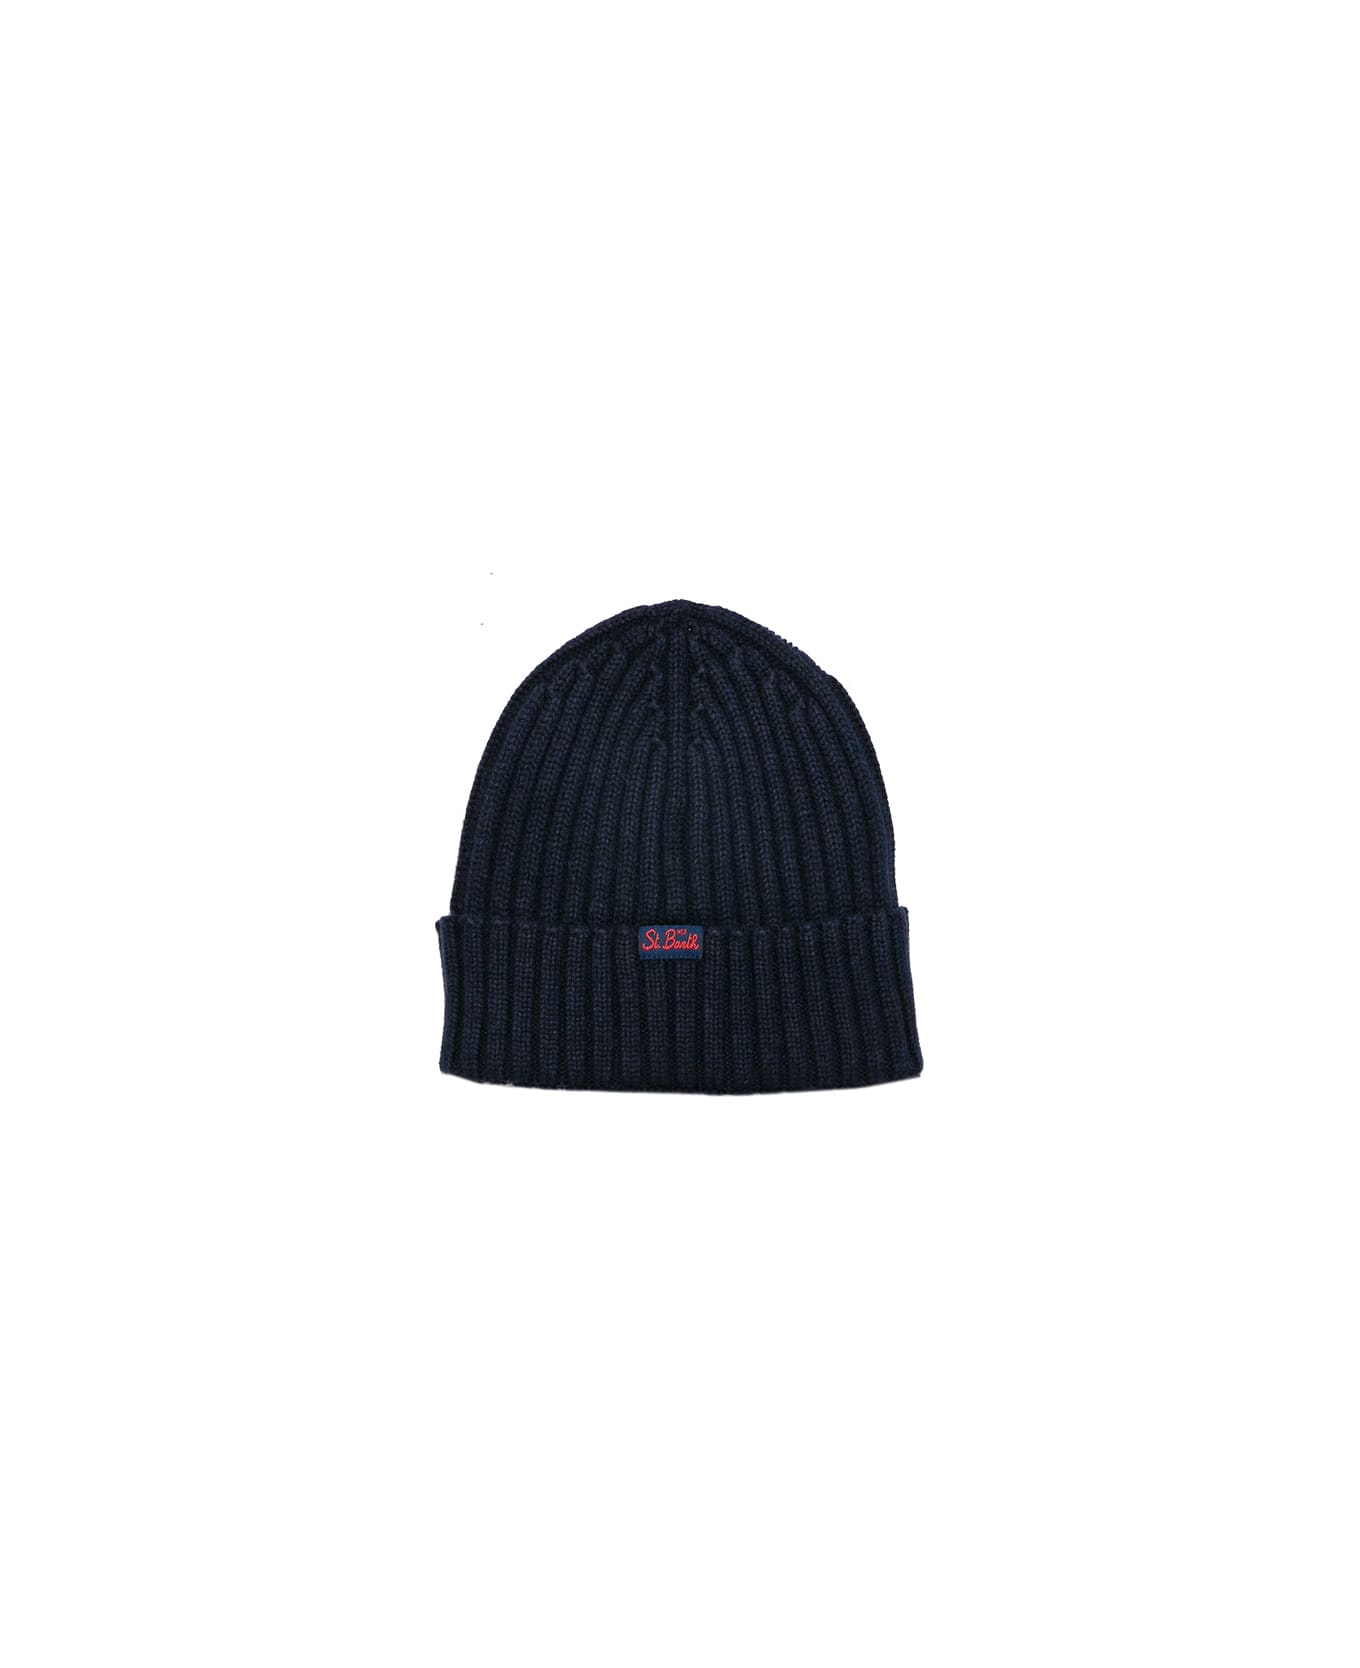 MC2 Saint Barth Blended Cashmere Hat With St. Barth Navy Patch - BLUE